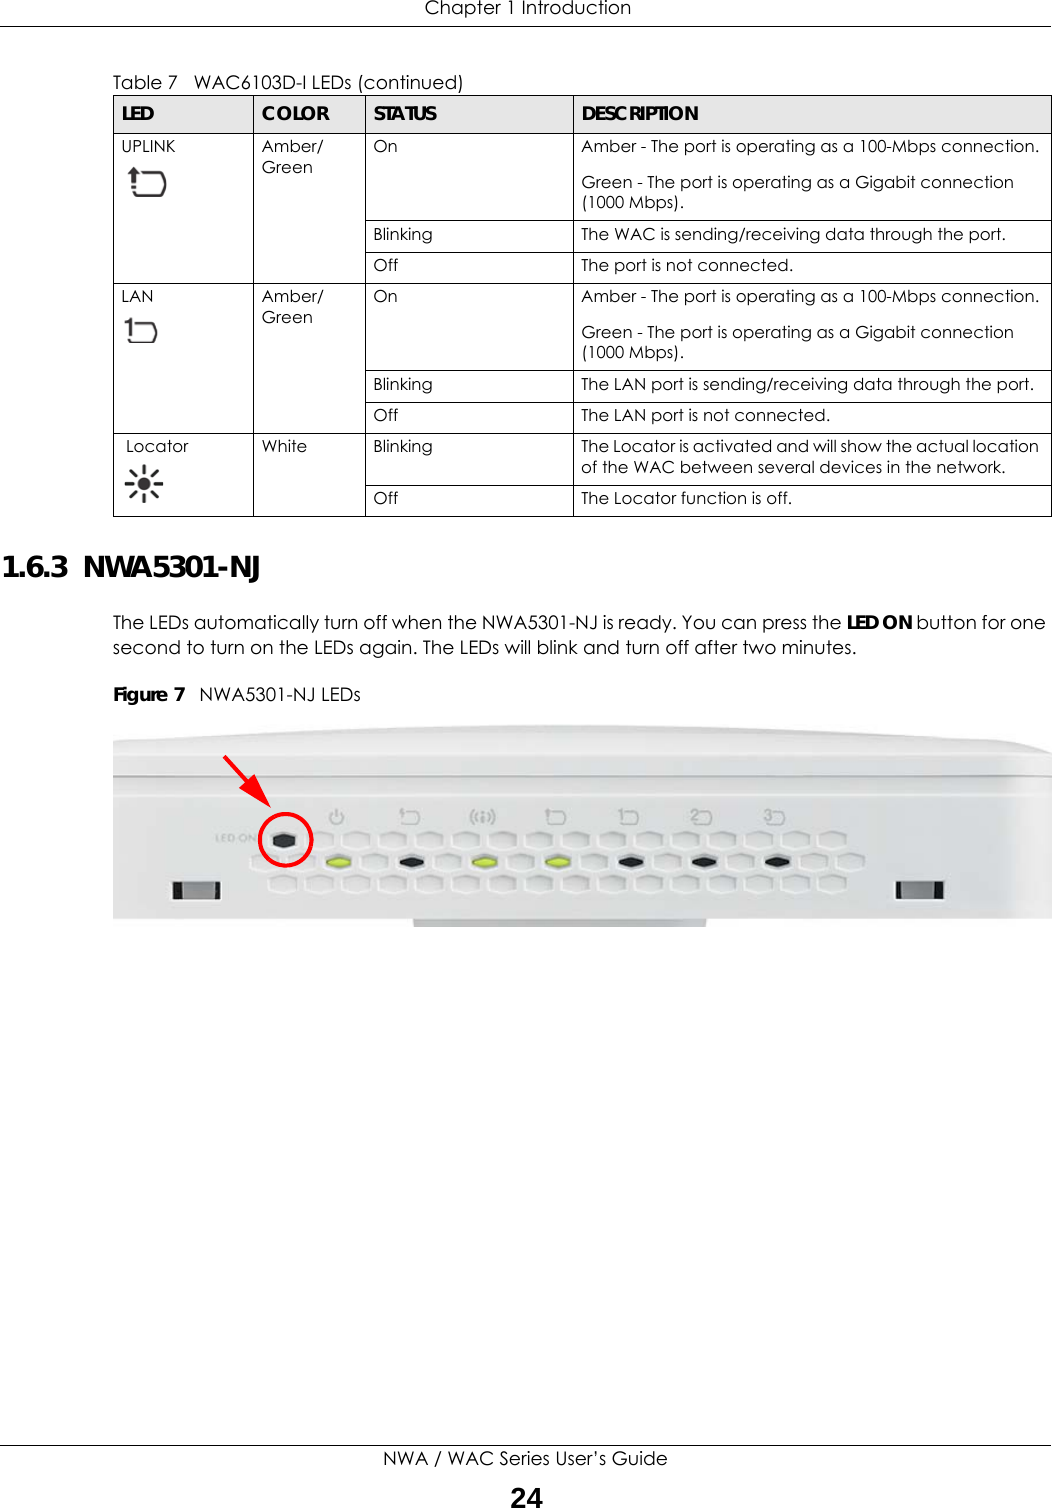  Chapter 1 IntroductionNWA / WAC Series User’s Guide241.6.3  NWA5301-NJThe LEDs automatically turn off when the NWA5301-NJ is ready. You can press the LED ON button for one second to turn on the LEDs again. The LEDs will blink and turn off after two minutes.Figure 7   NWA5301-NJ LEDs UPLINK Amber/GreenOn Amber - The port is operating as a 100-Mbps connection.Green - The port is operating as a Gigabit connection (1000 Mbps).Blinking The WAC is sending/receiving data through the port.Off The port is not connected.LAN Amber/GreenOn Amber - The port is operating as a 100-Mbps connection.Green - The port is operating as a Gigabit connection (1000 Mbps).Blinking The LAN port is sending/receiving data through the port.Off The LAN port is not connected. Locator White Blinking The Locator is activated and will show the actual location of the WAC between several devices in the network.Off The Locator function is off.Table 7   WAC6103D-I LEDs (continued)LED COLOR STATUS DESCRIPTION